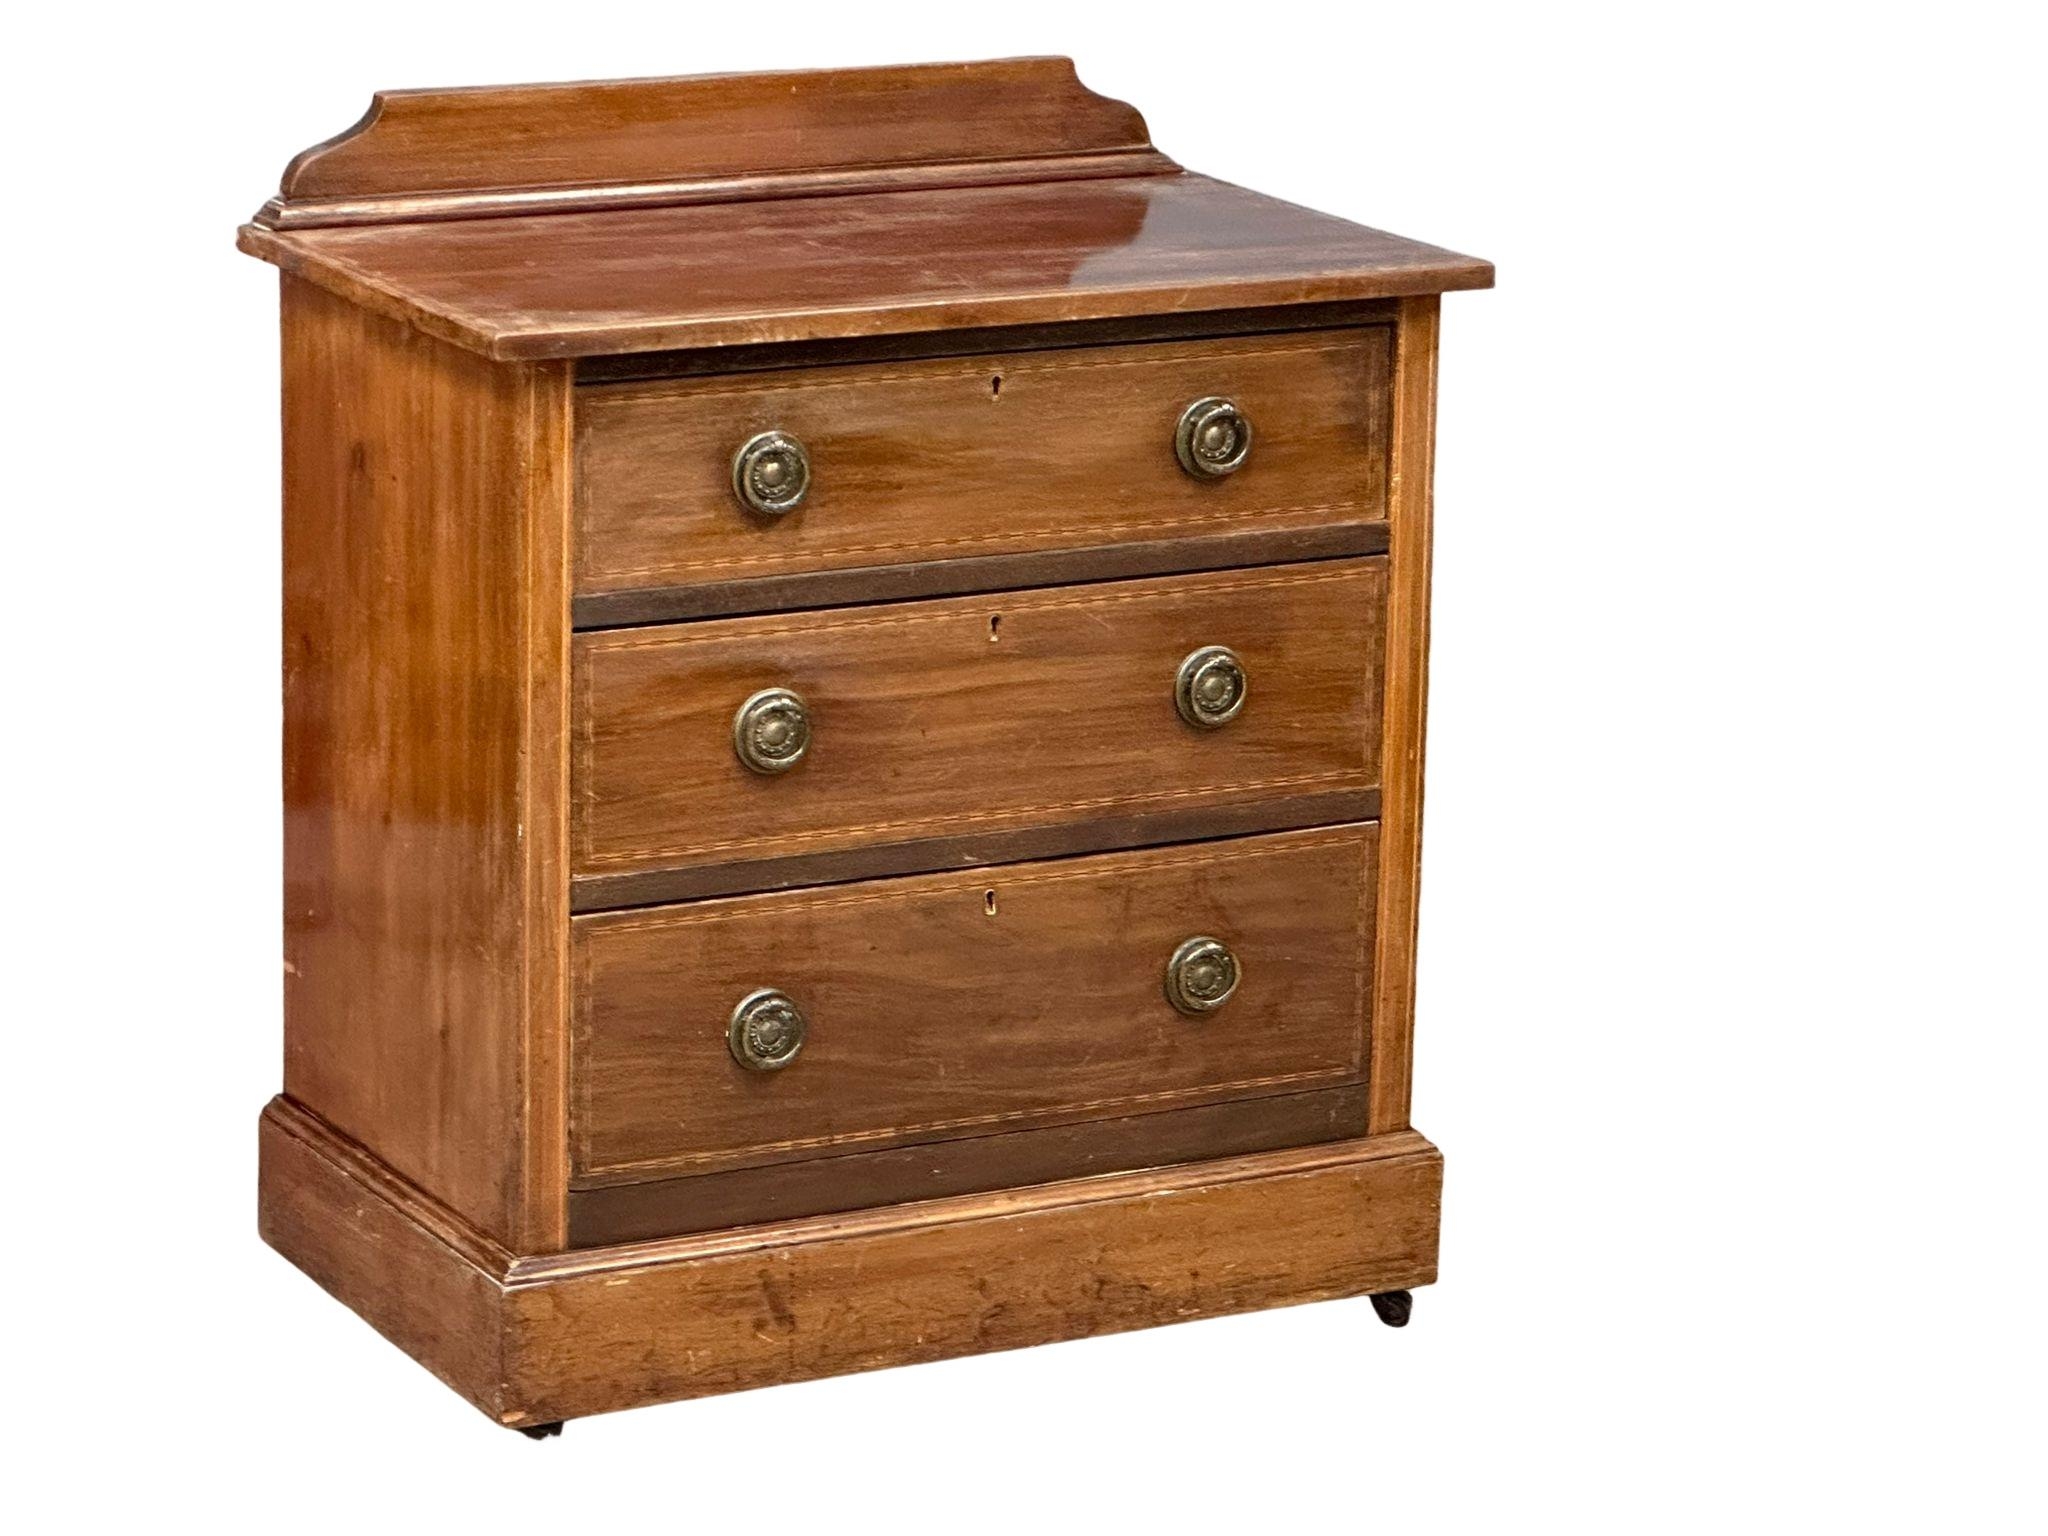 An Edwardian inlaid mahogany chest of drawers. Fine proportioned. 76x46x88cm - Image 2 of 4